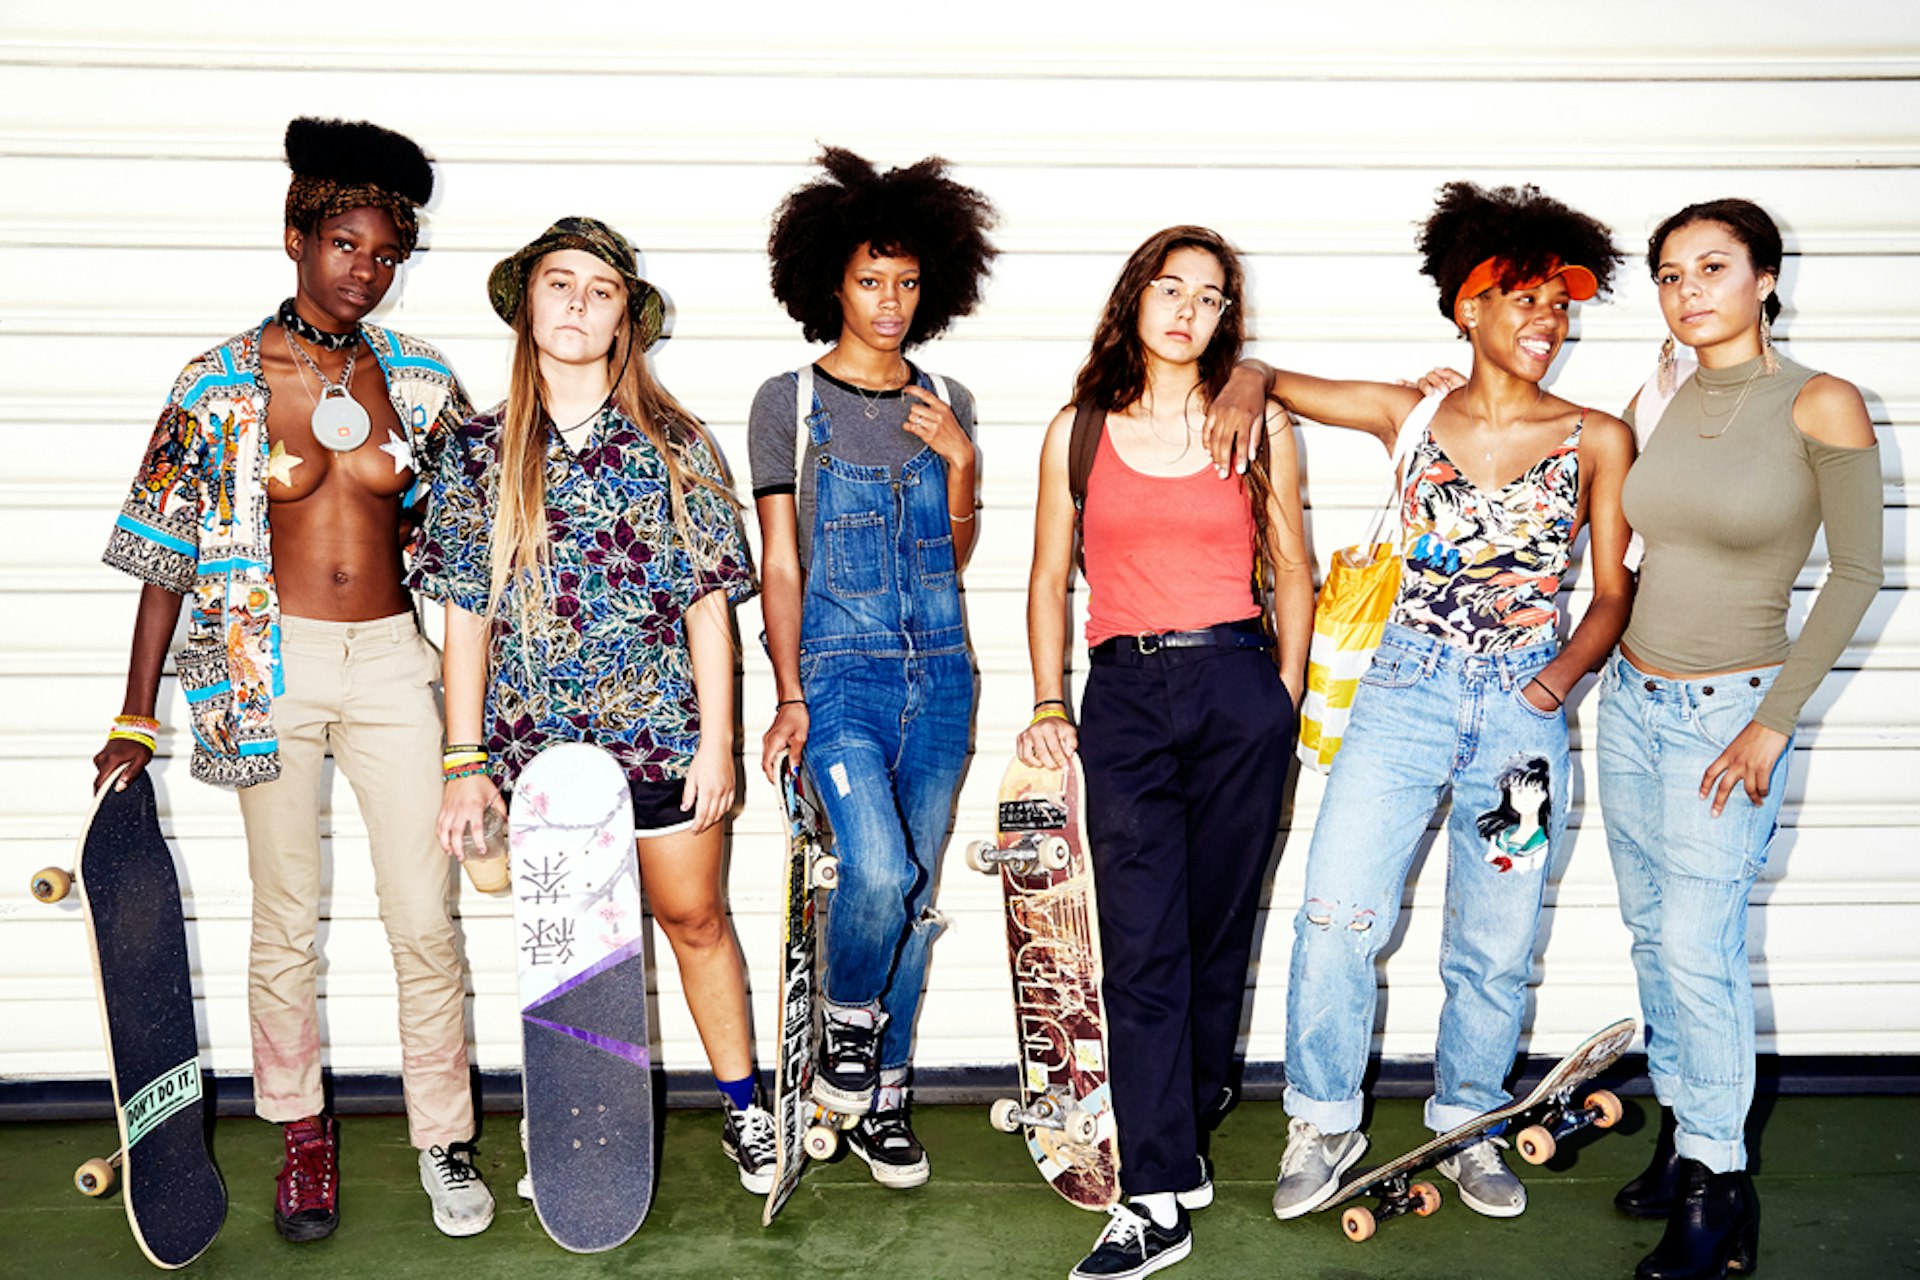 Skate Kitchen by photographer Amy Lombard